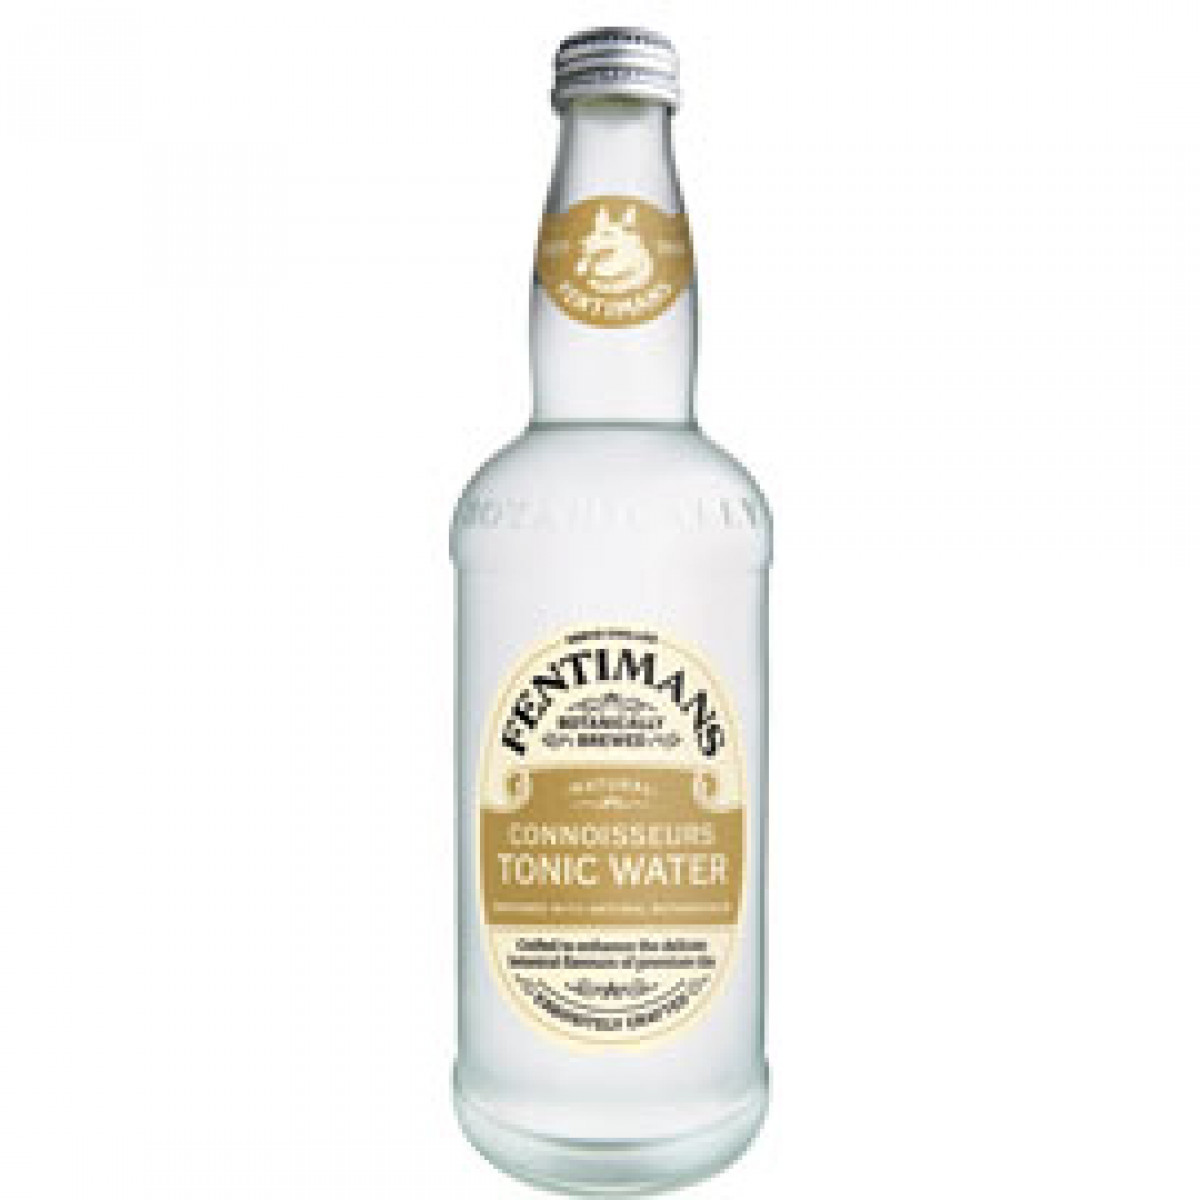 Product picture for Connoisseurs Tonic Water